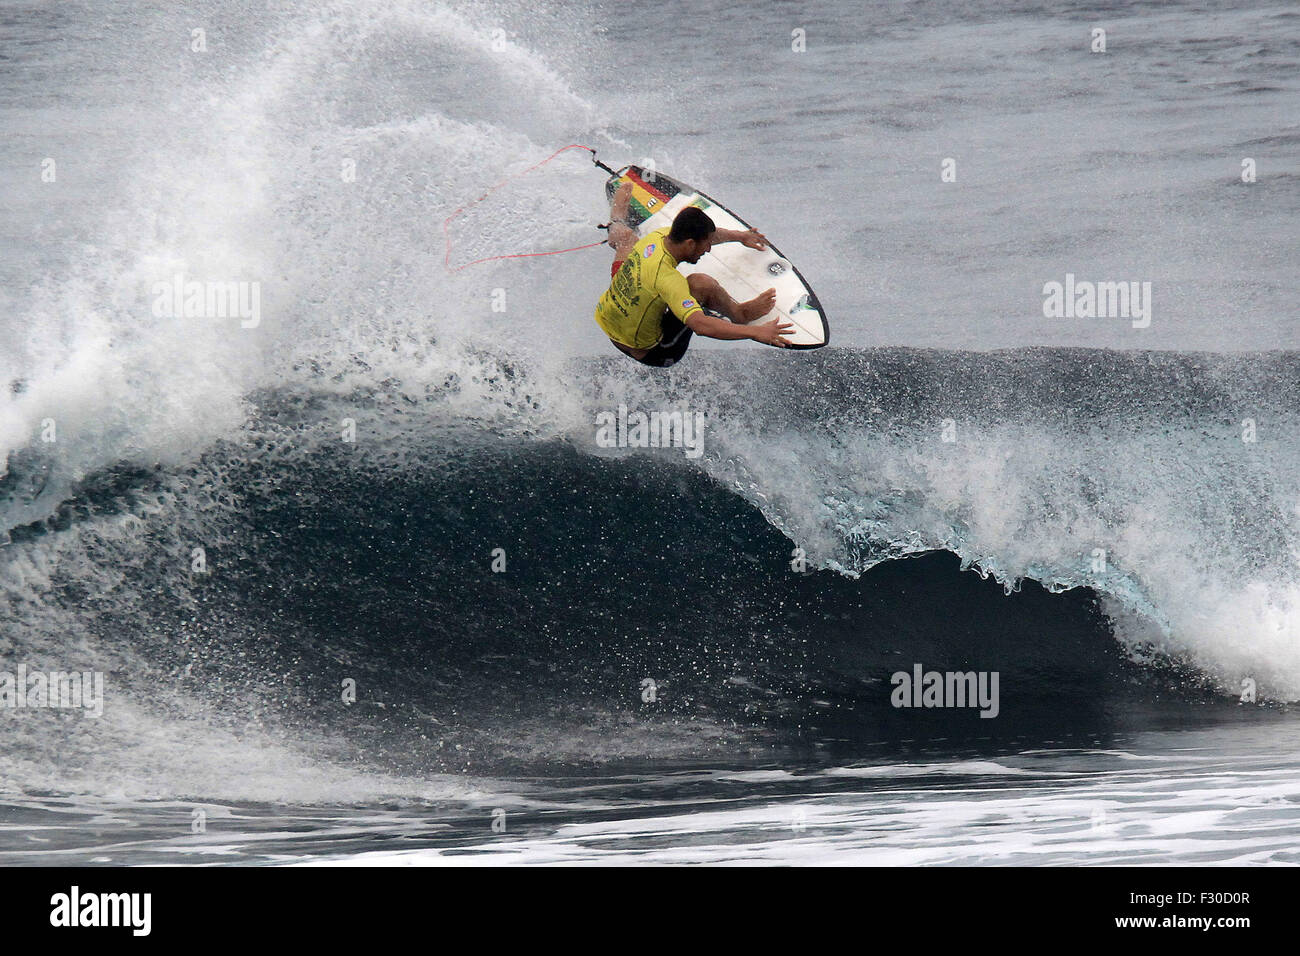 Siargao Island, Philippines. 26th Sep, 2015. Lucas Chianca of Brazil competes during day 2 of the 21st Siargao International Surfing Cup in Siargao Island, the Philippines, Sept. 26, 2015. The 21st Siargao International Surfing Cup showcases some of the world's professional surfers vying for the USD$50,000 prize. © Rouelle Umali/Xinhua/Alamy Live News Stock Photo